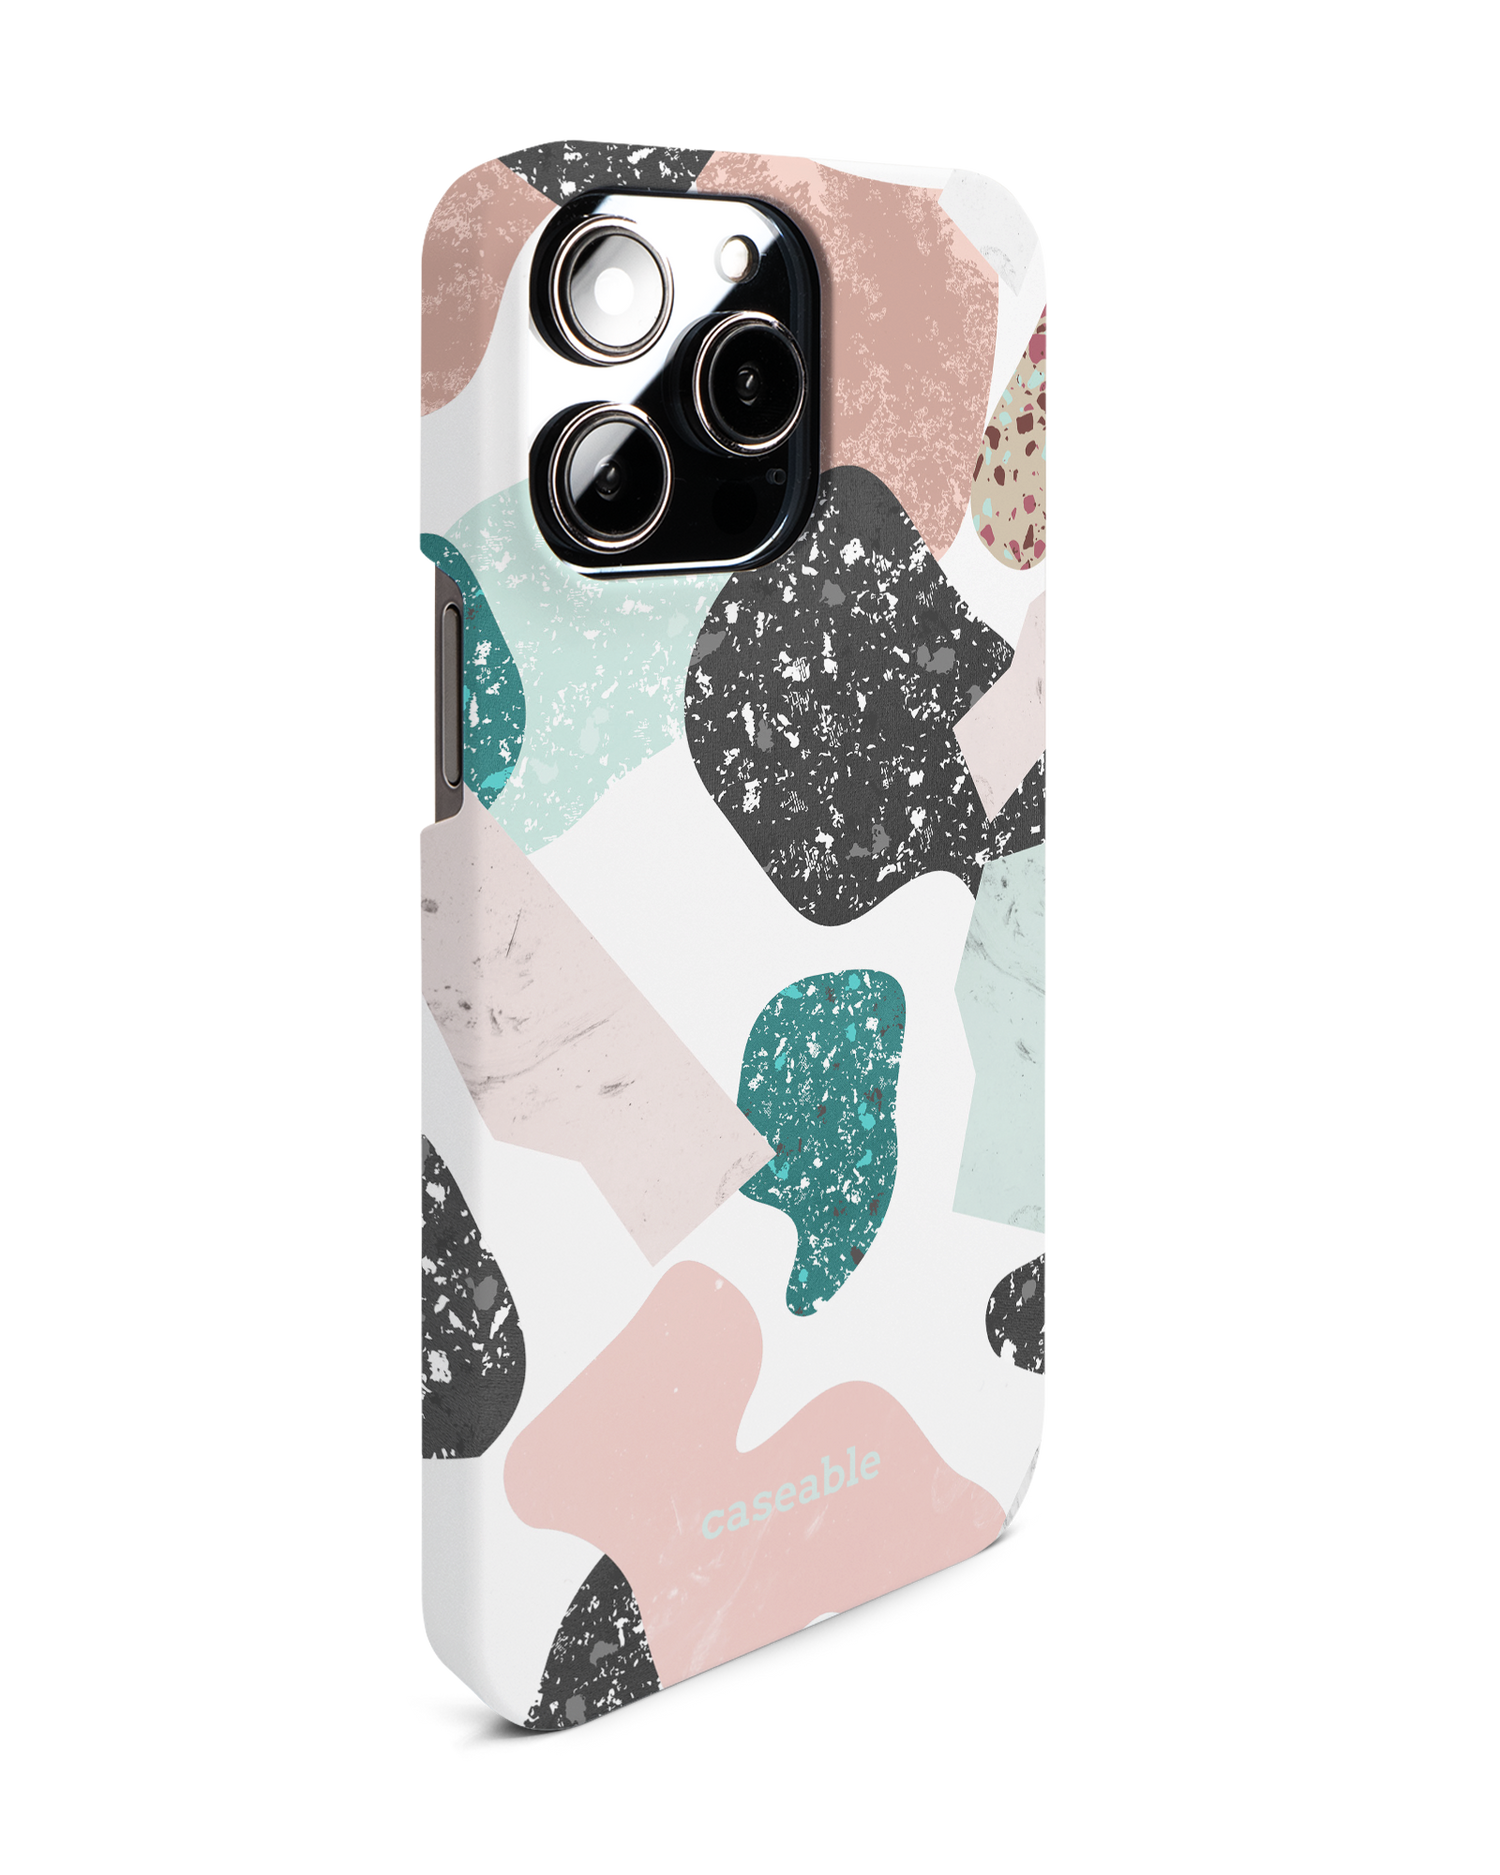 Scattered Shapes Hard Shell Phone Case for Apple iPhone 14 Pro Max: View from the left side